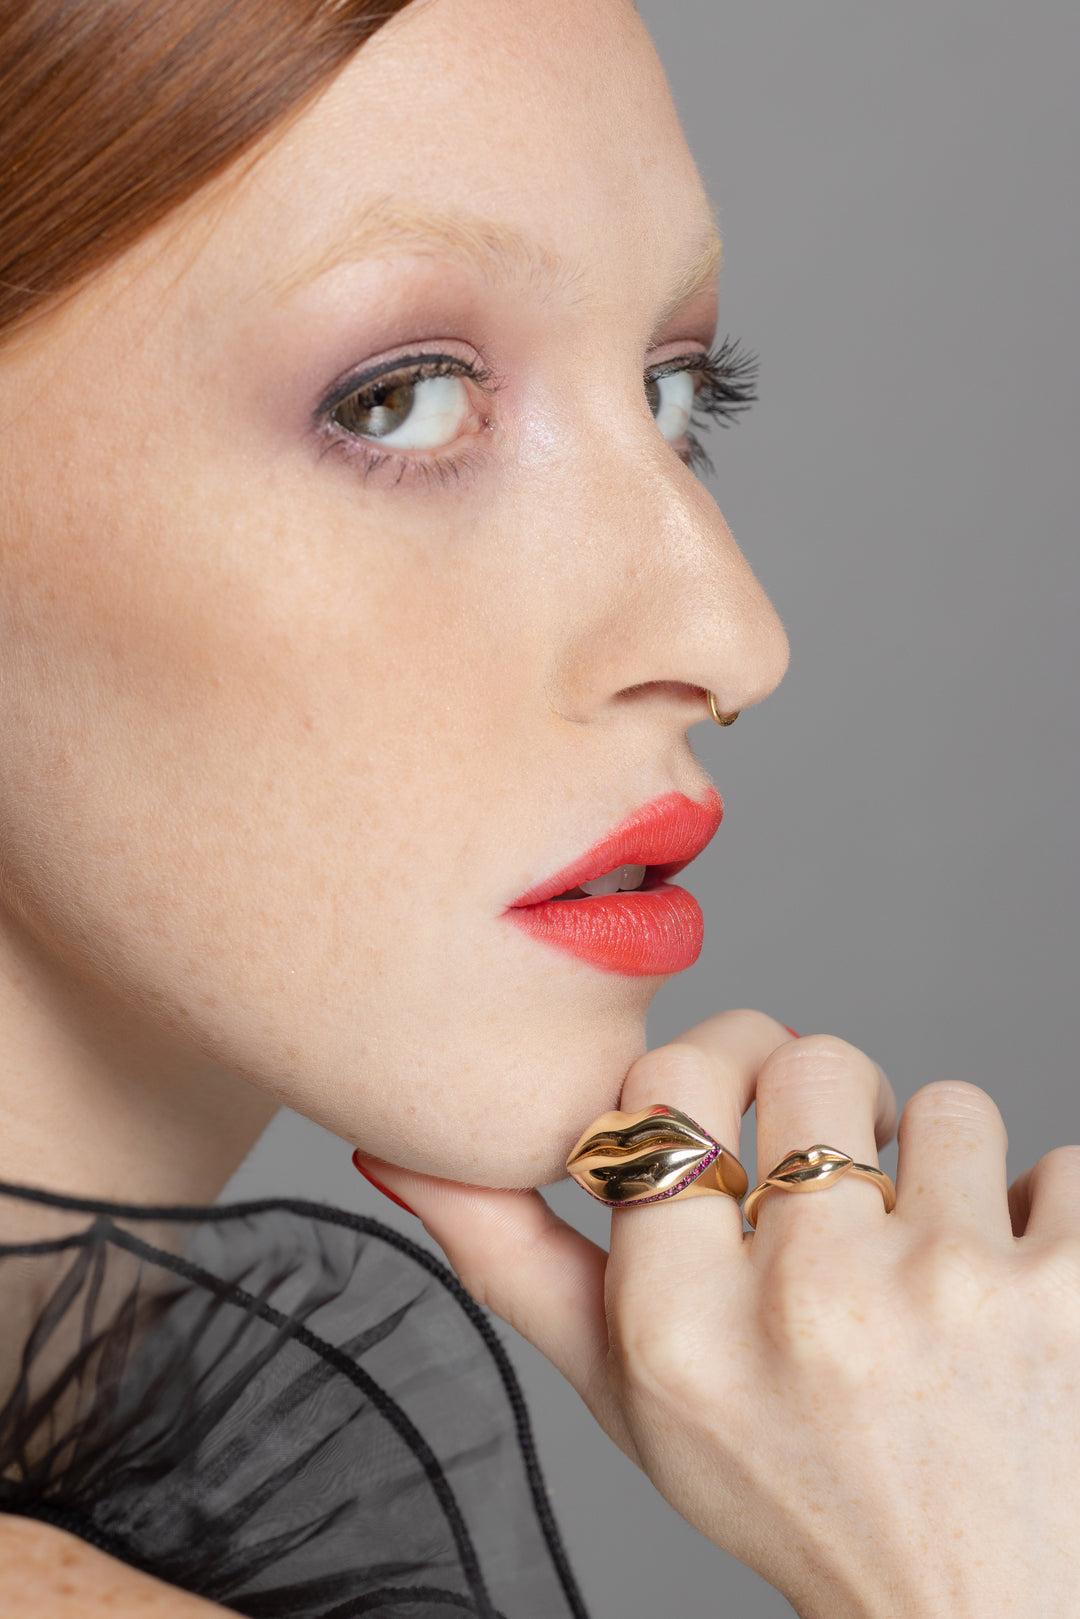 red head model wearing gold lip ring on her hand next to her mouth on a grey background